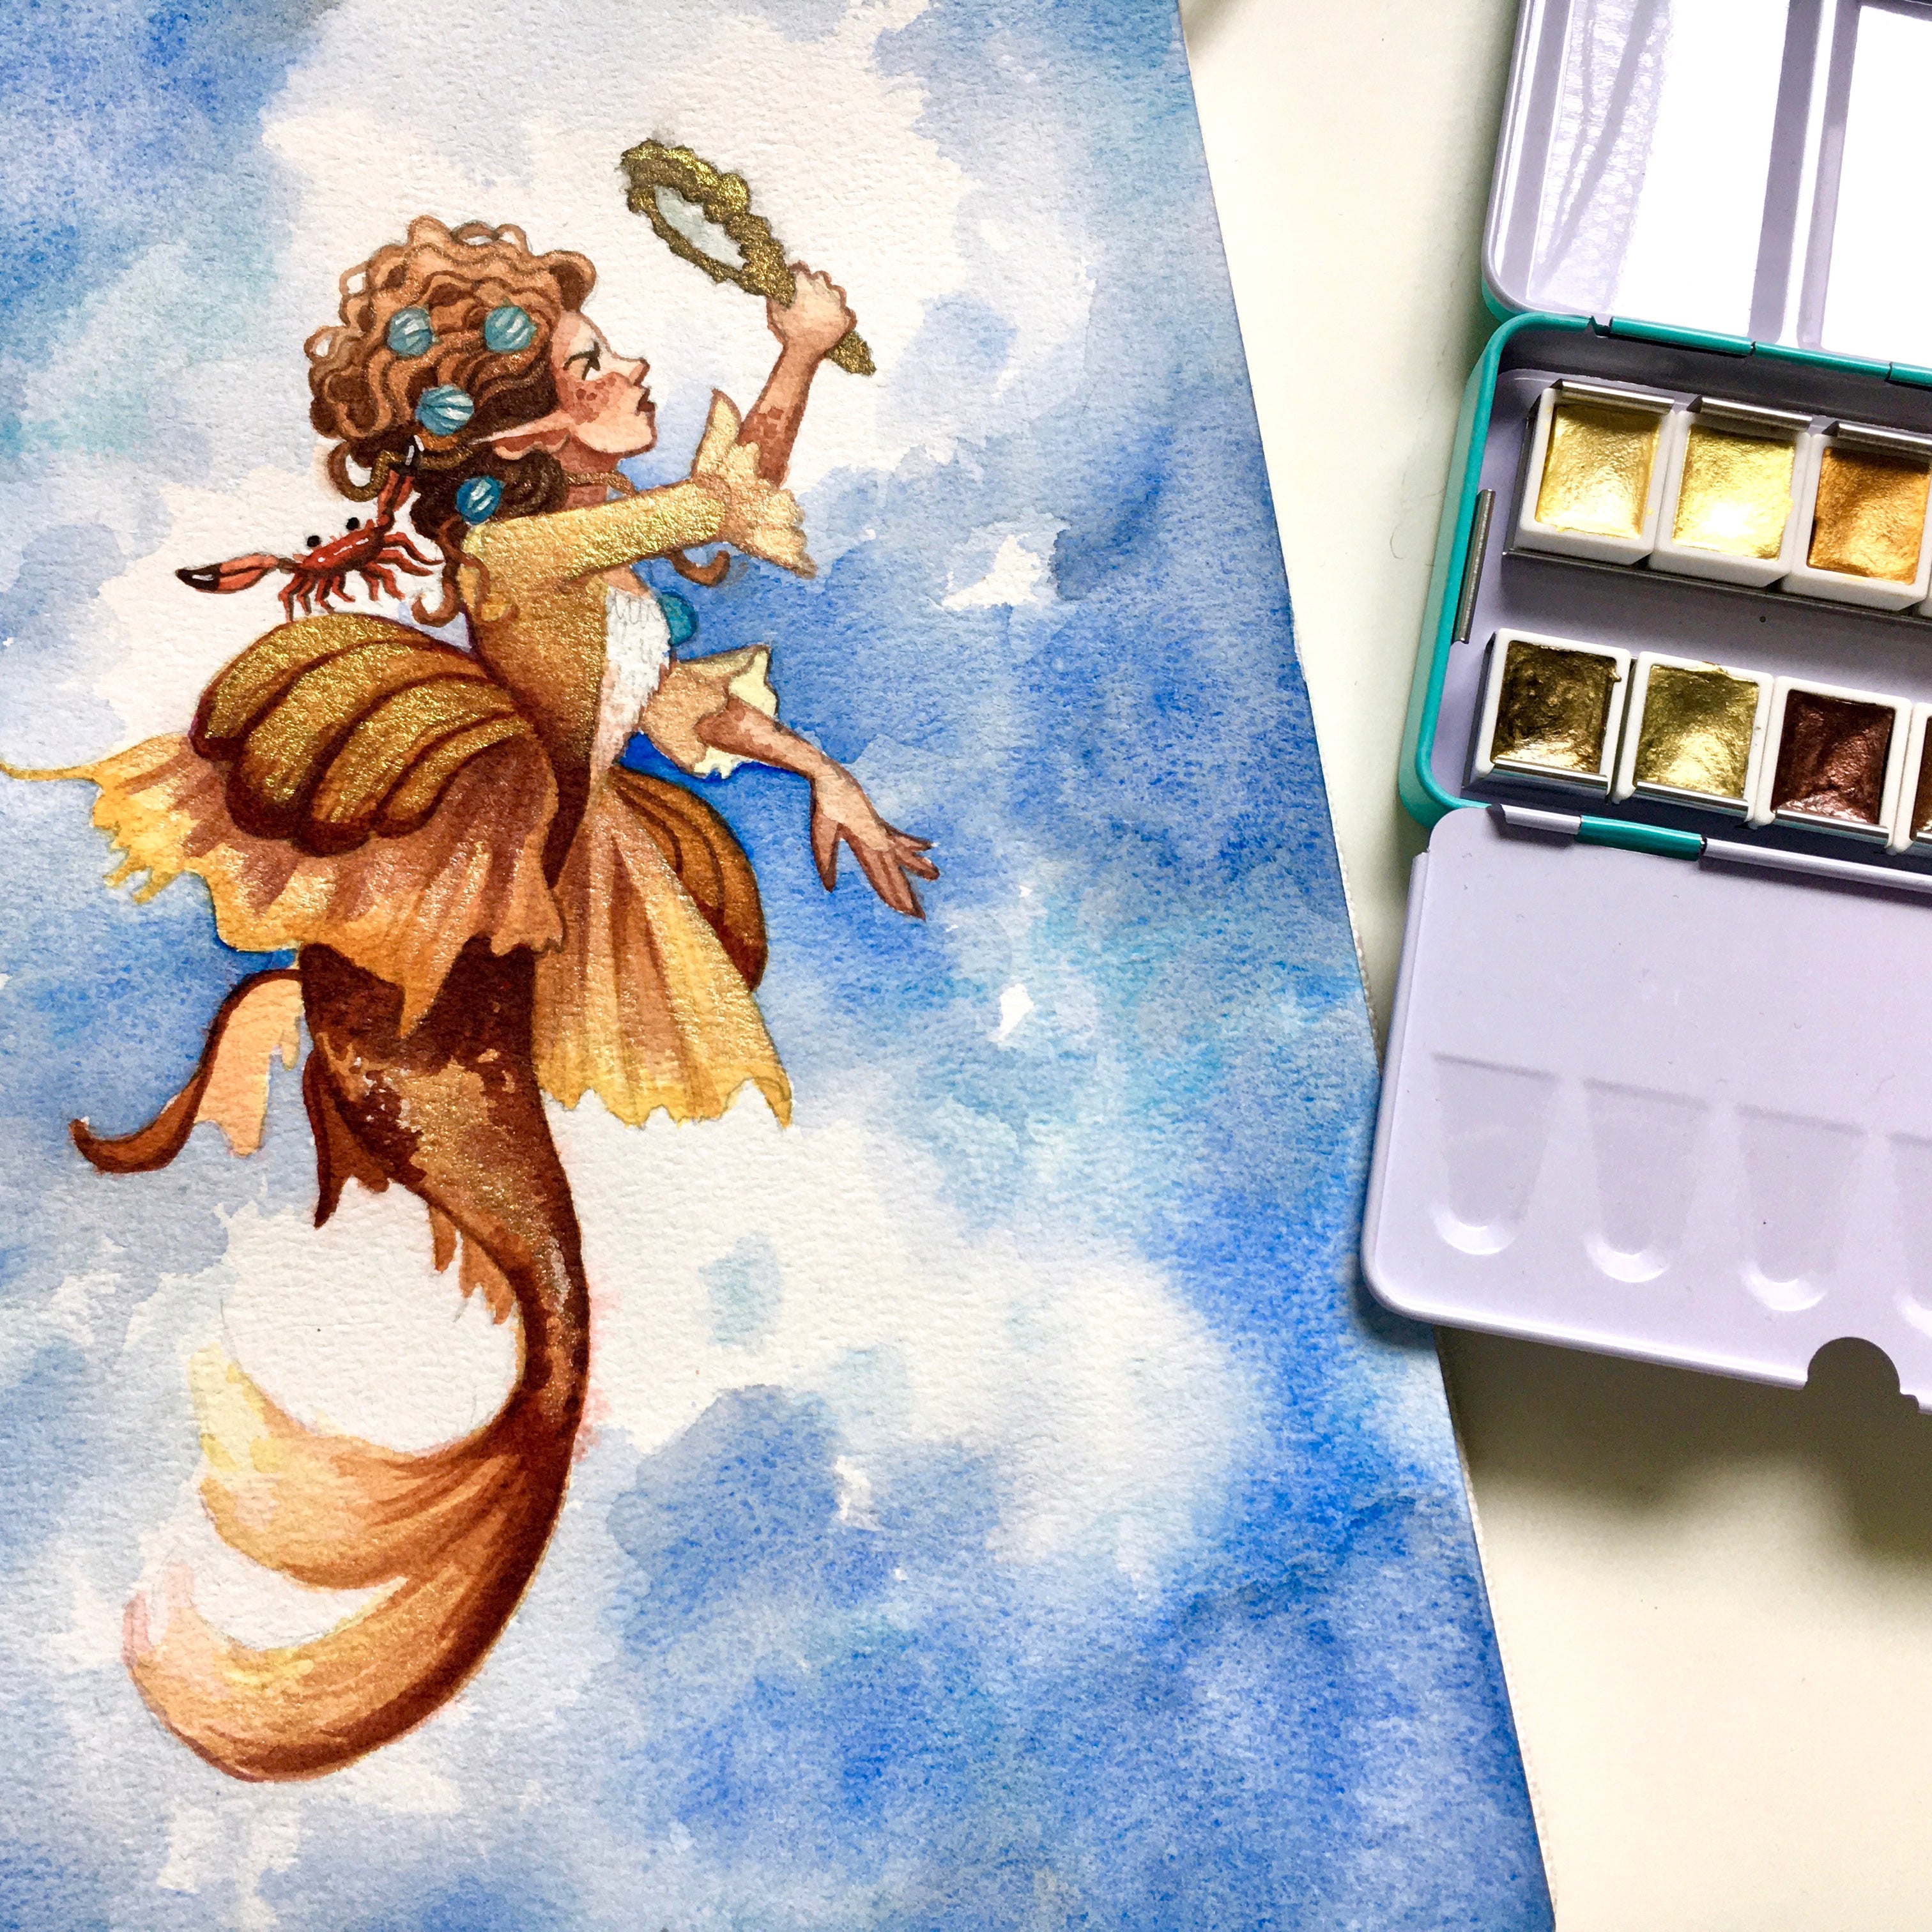 Watercolor Painting Ideas - The Good and the Beautiful